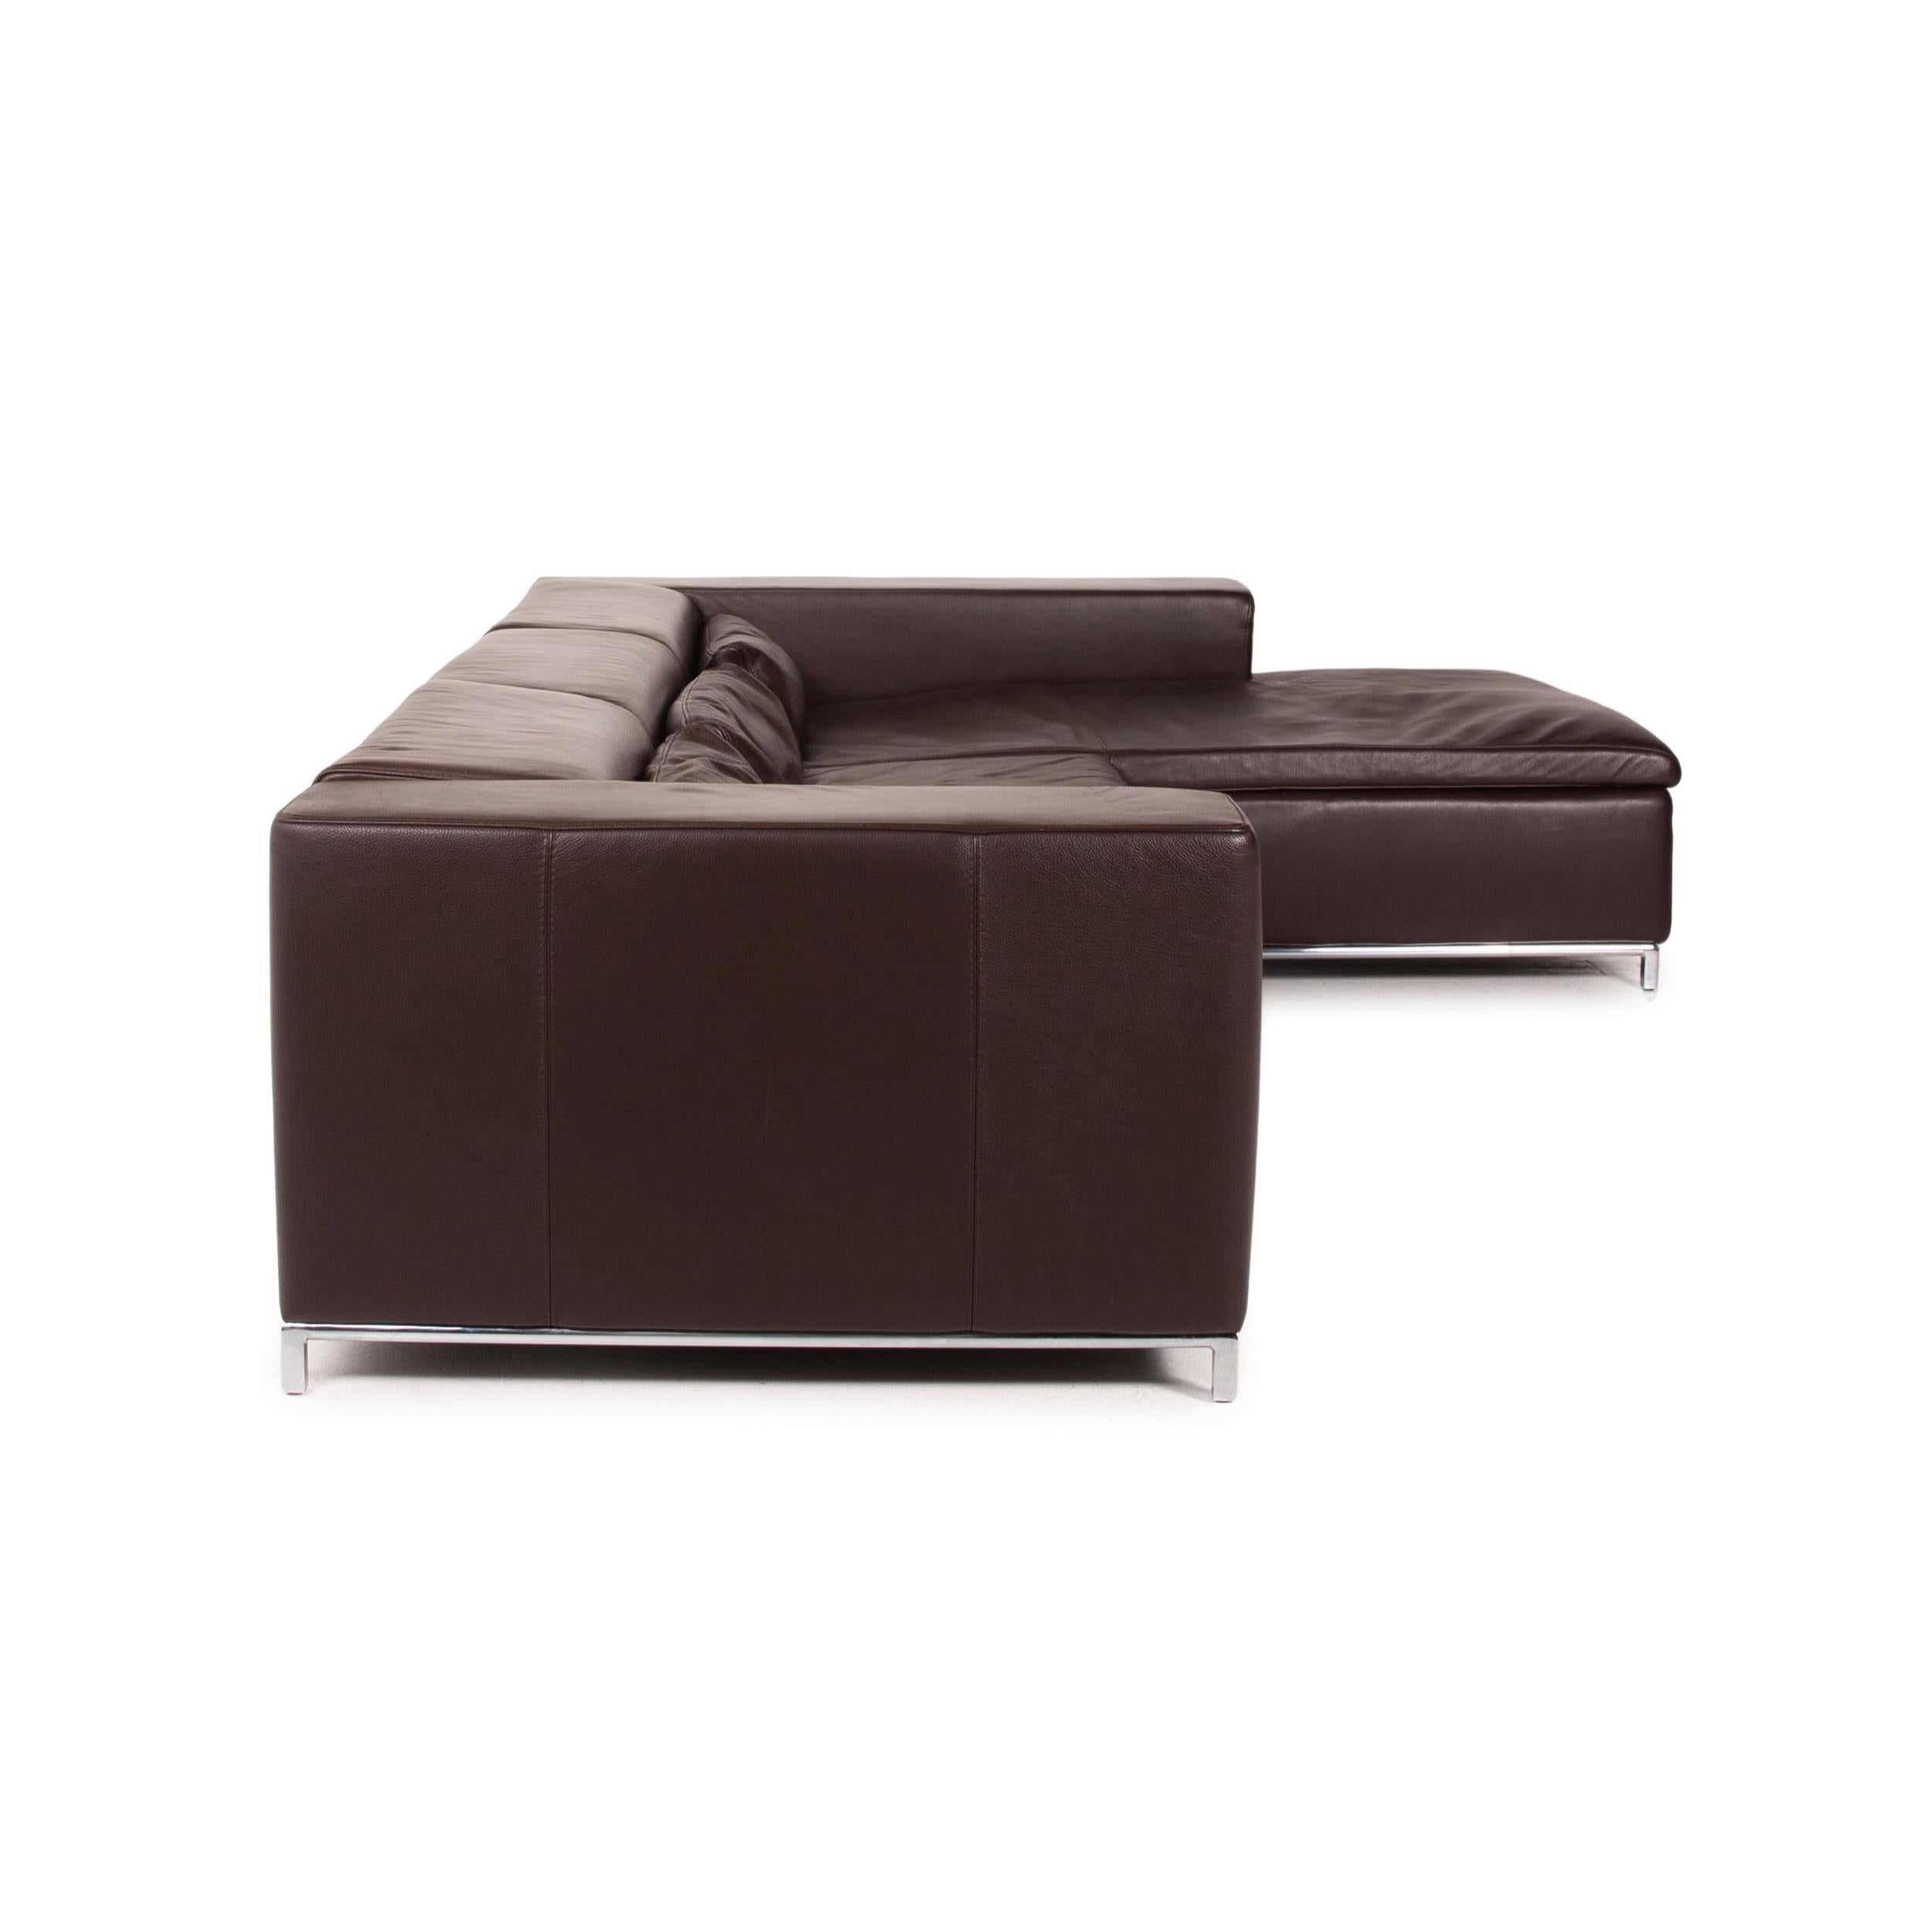 Who's Perfect Leather Corner Sofa Brown Dark Brown Sofa Couch 5